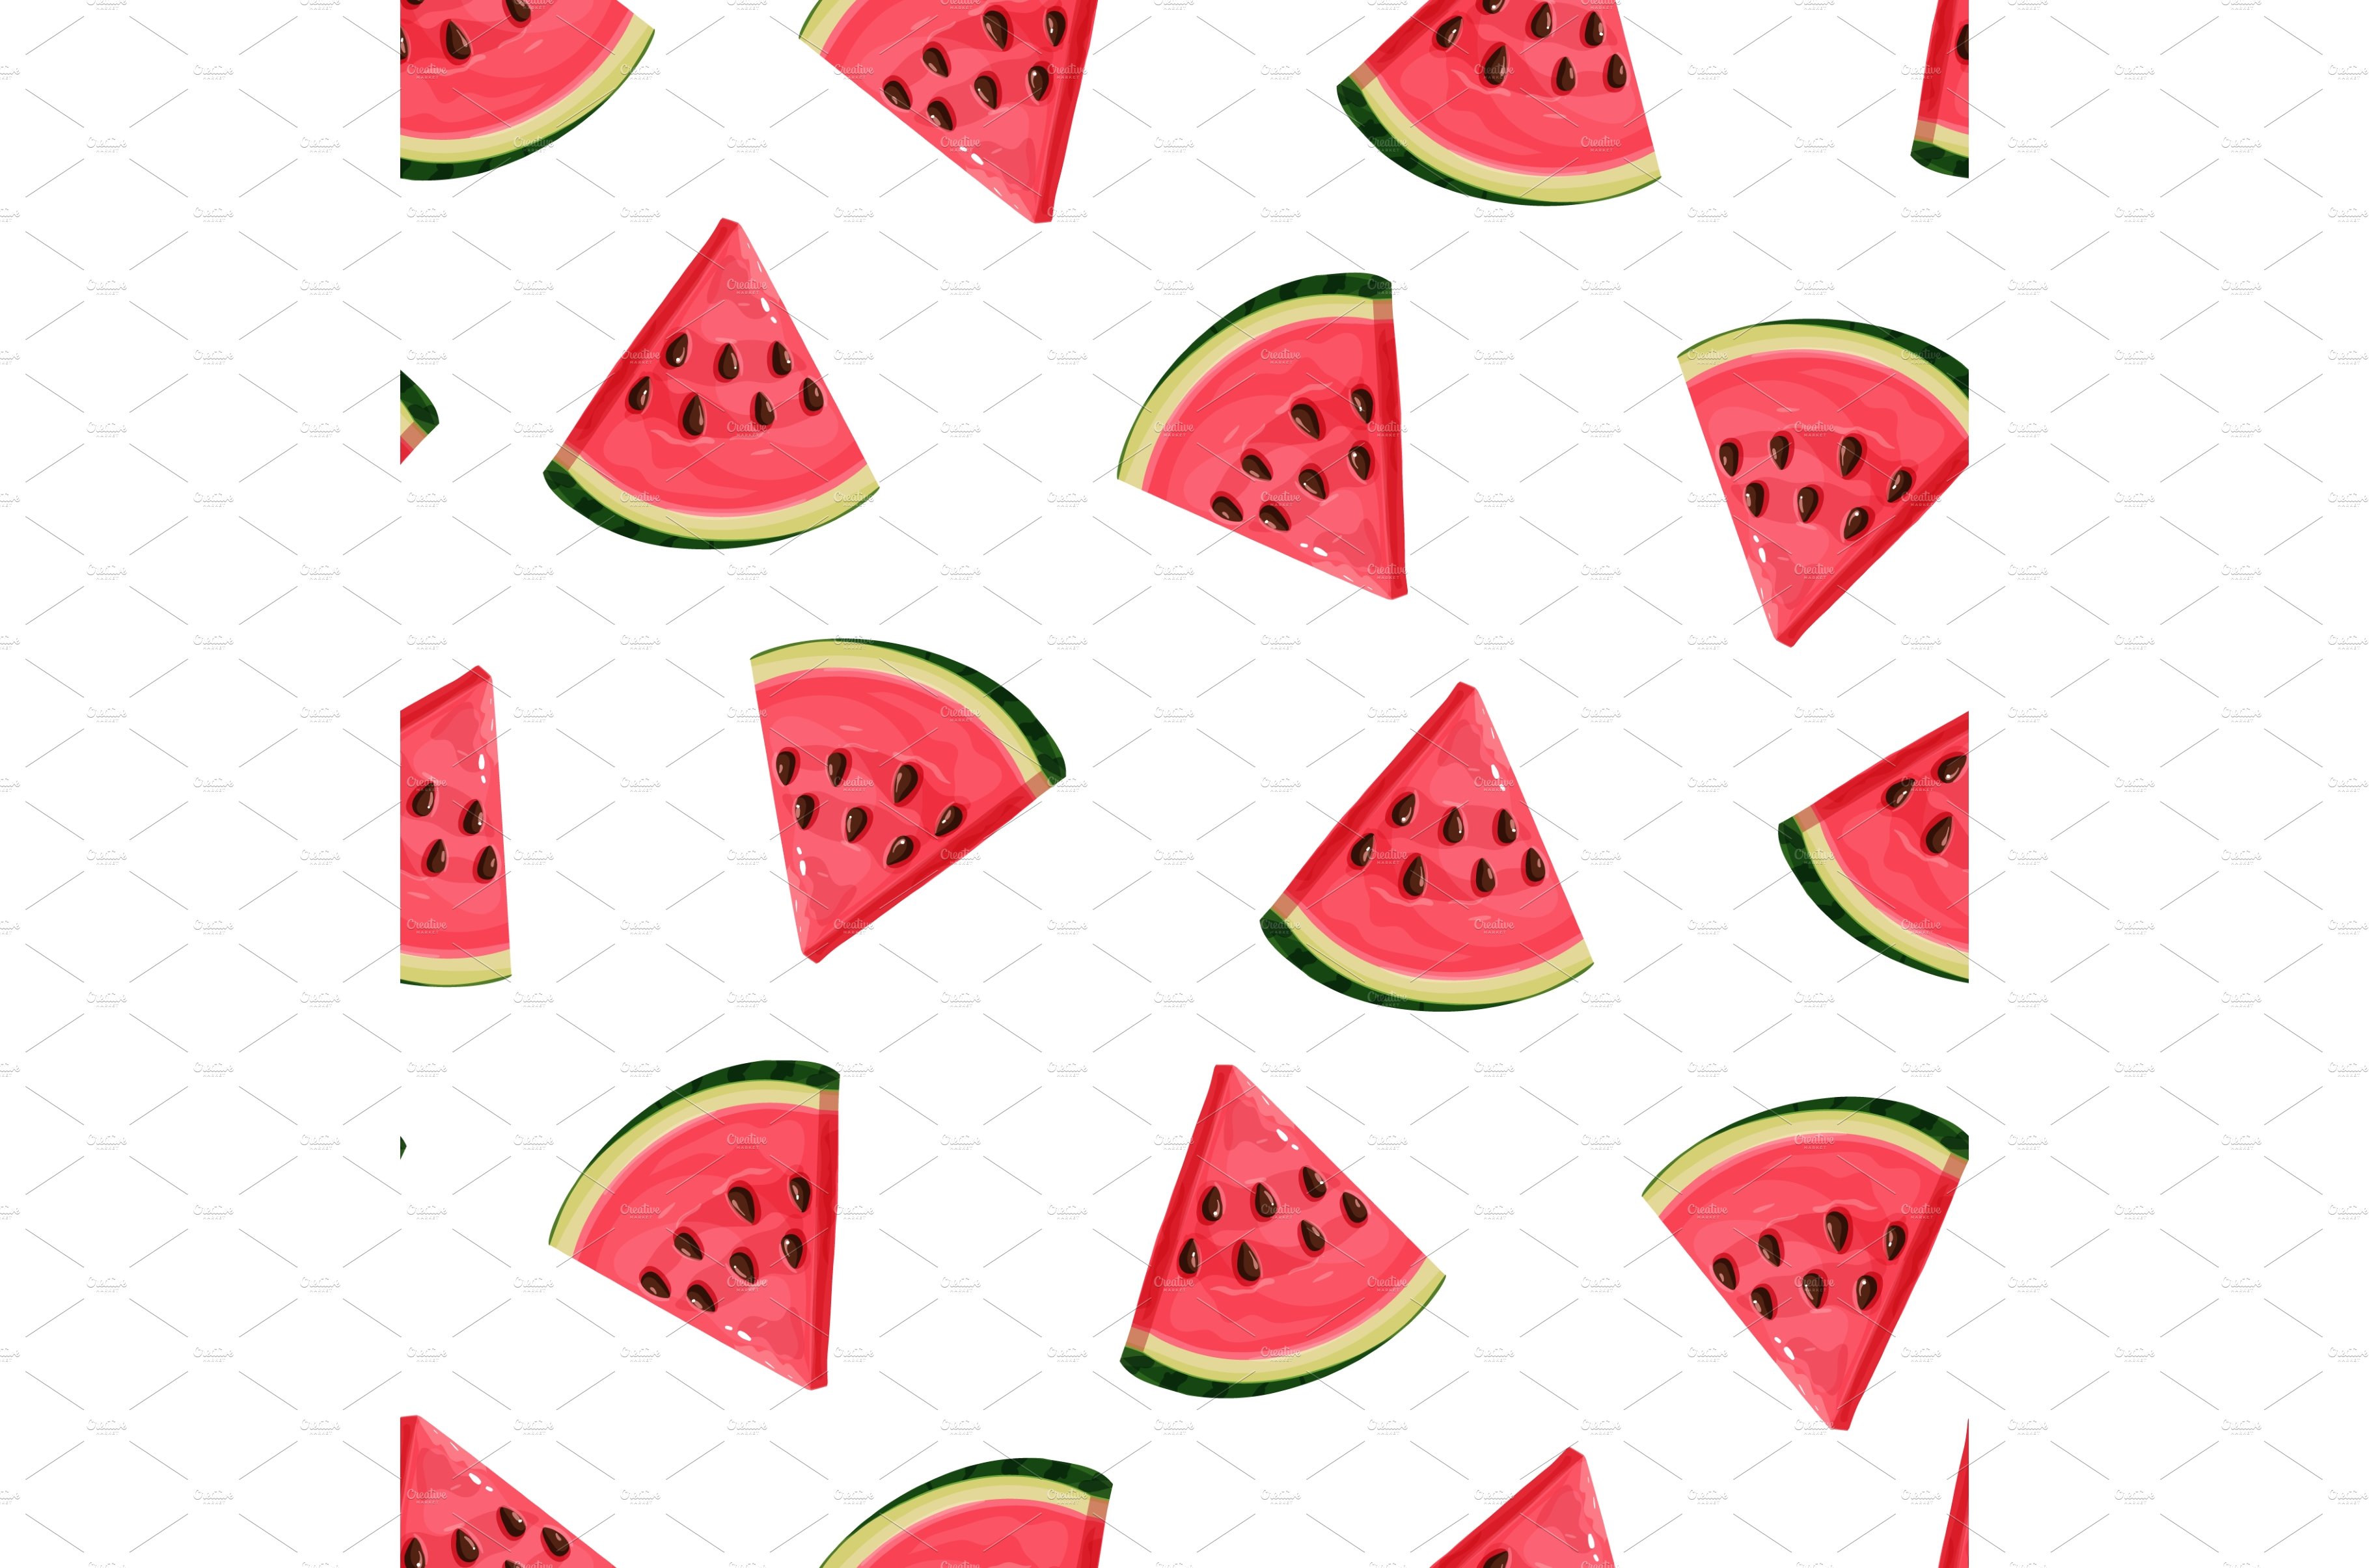 Watermelon Seamless Pattern cover image.